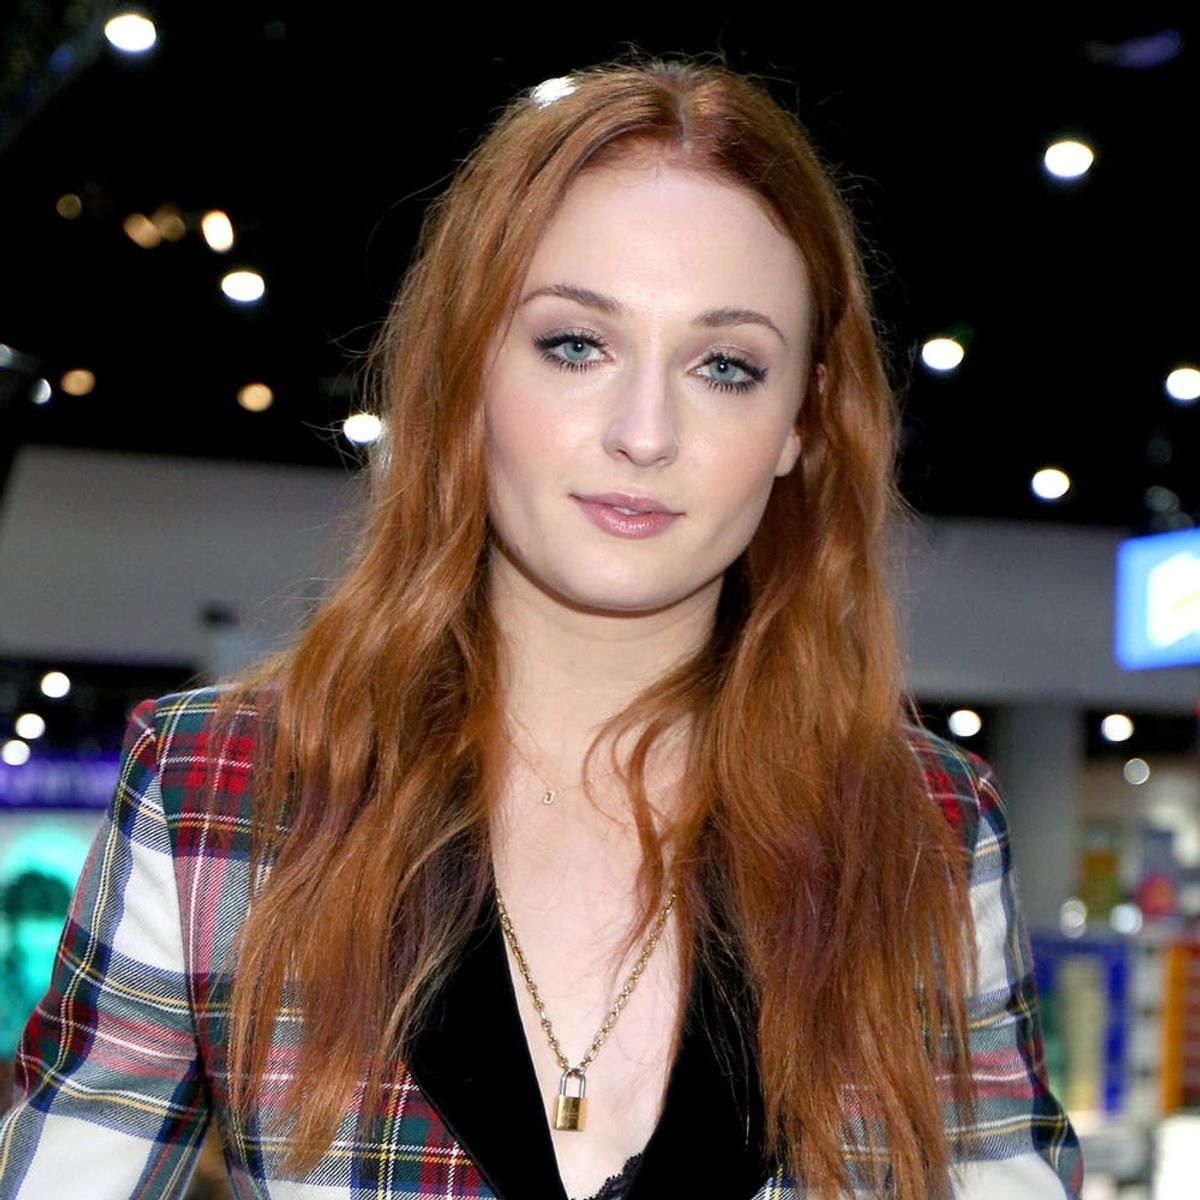 Sophie Turner’s Plaid Pantsuit Totally Has Us Flashing Back to “Clueless”